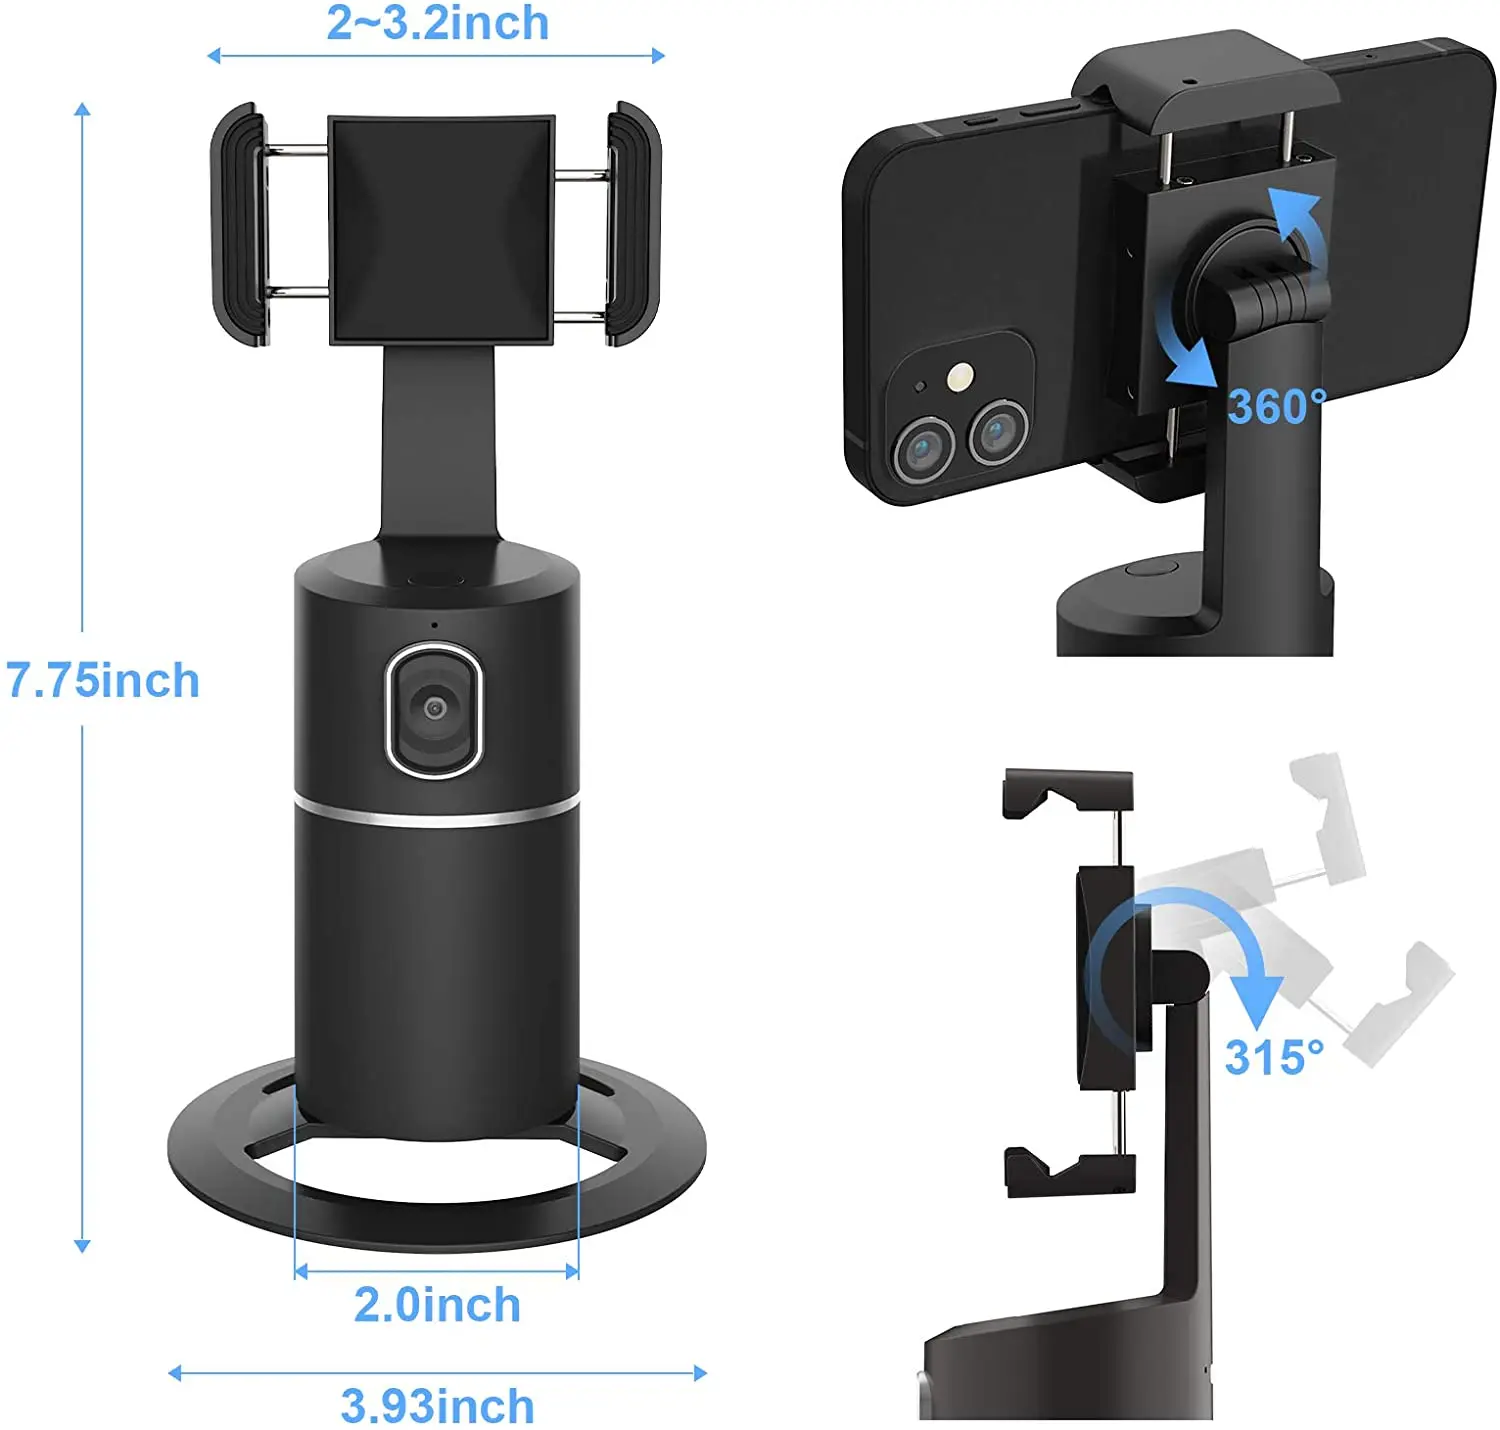 Auto Face Tracking Phone Mount